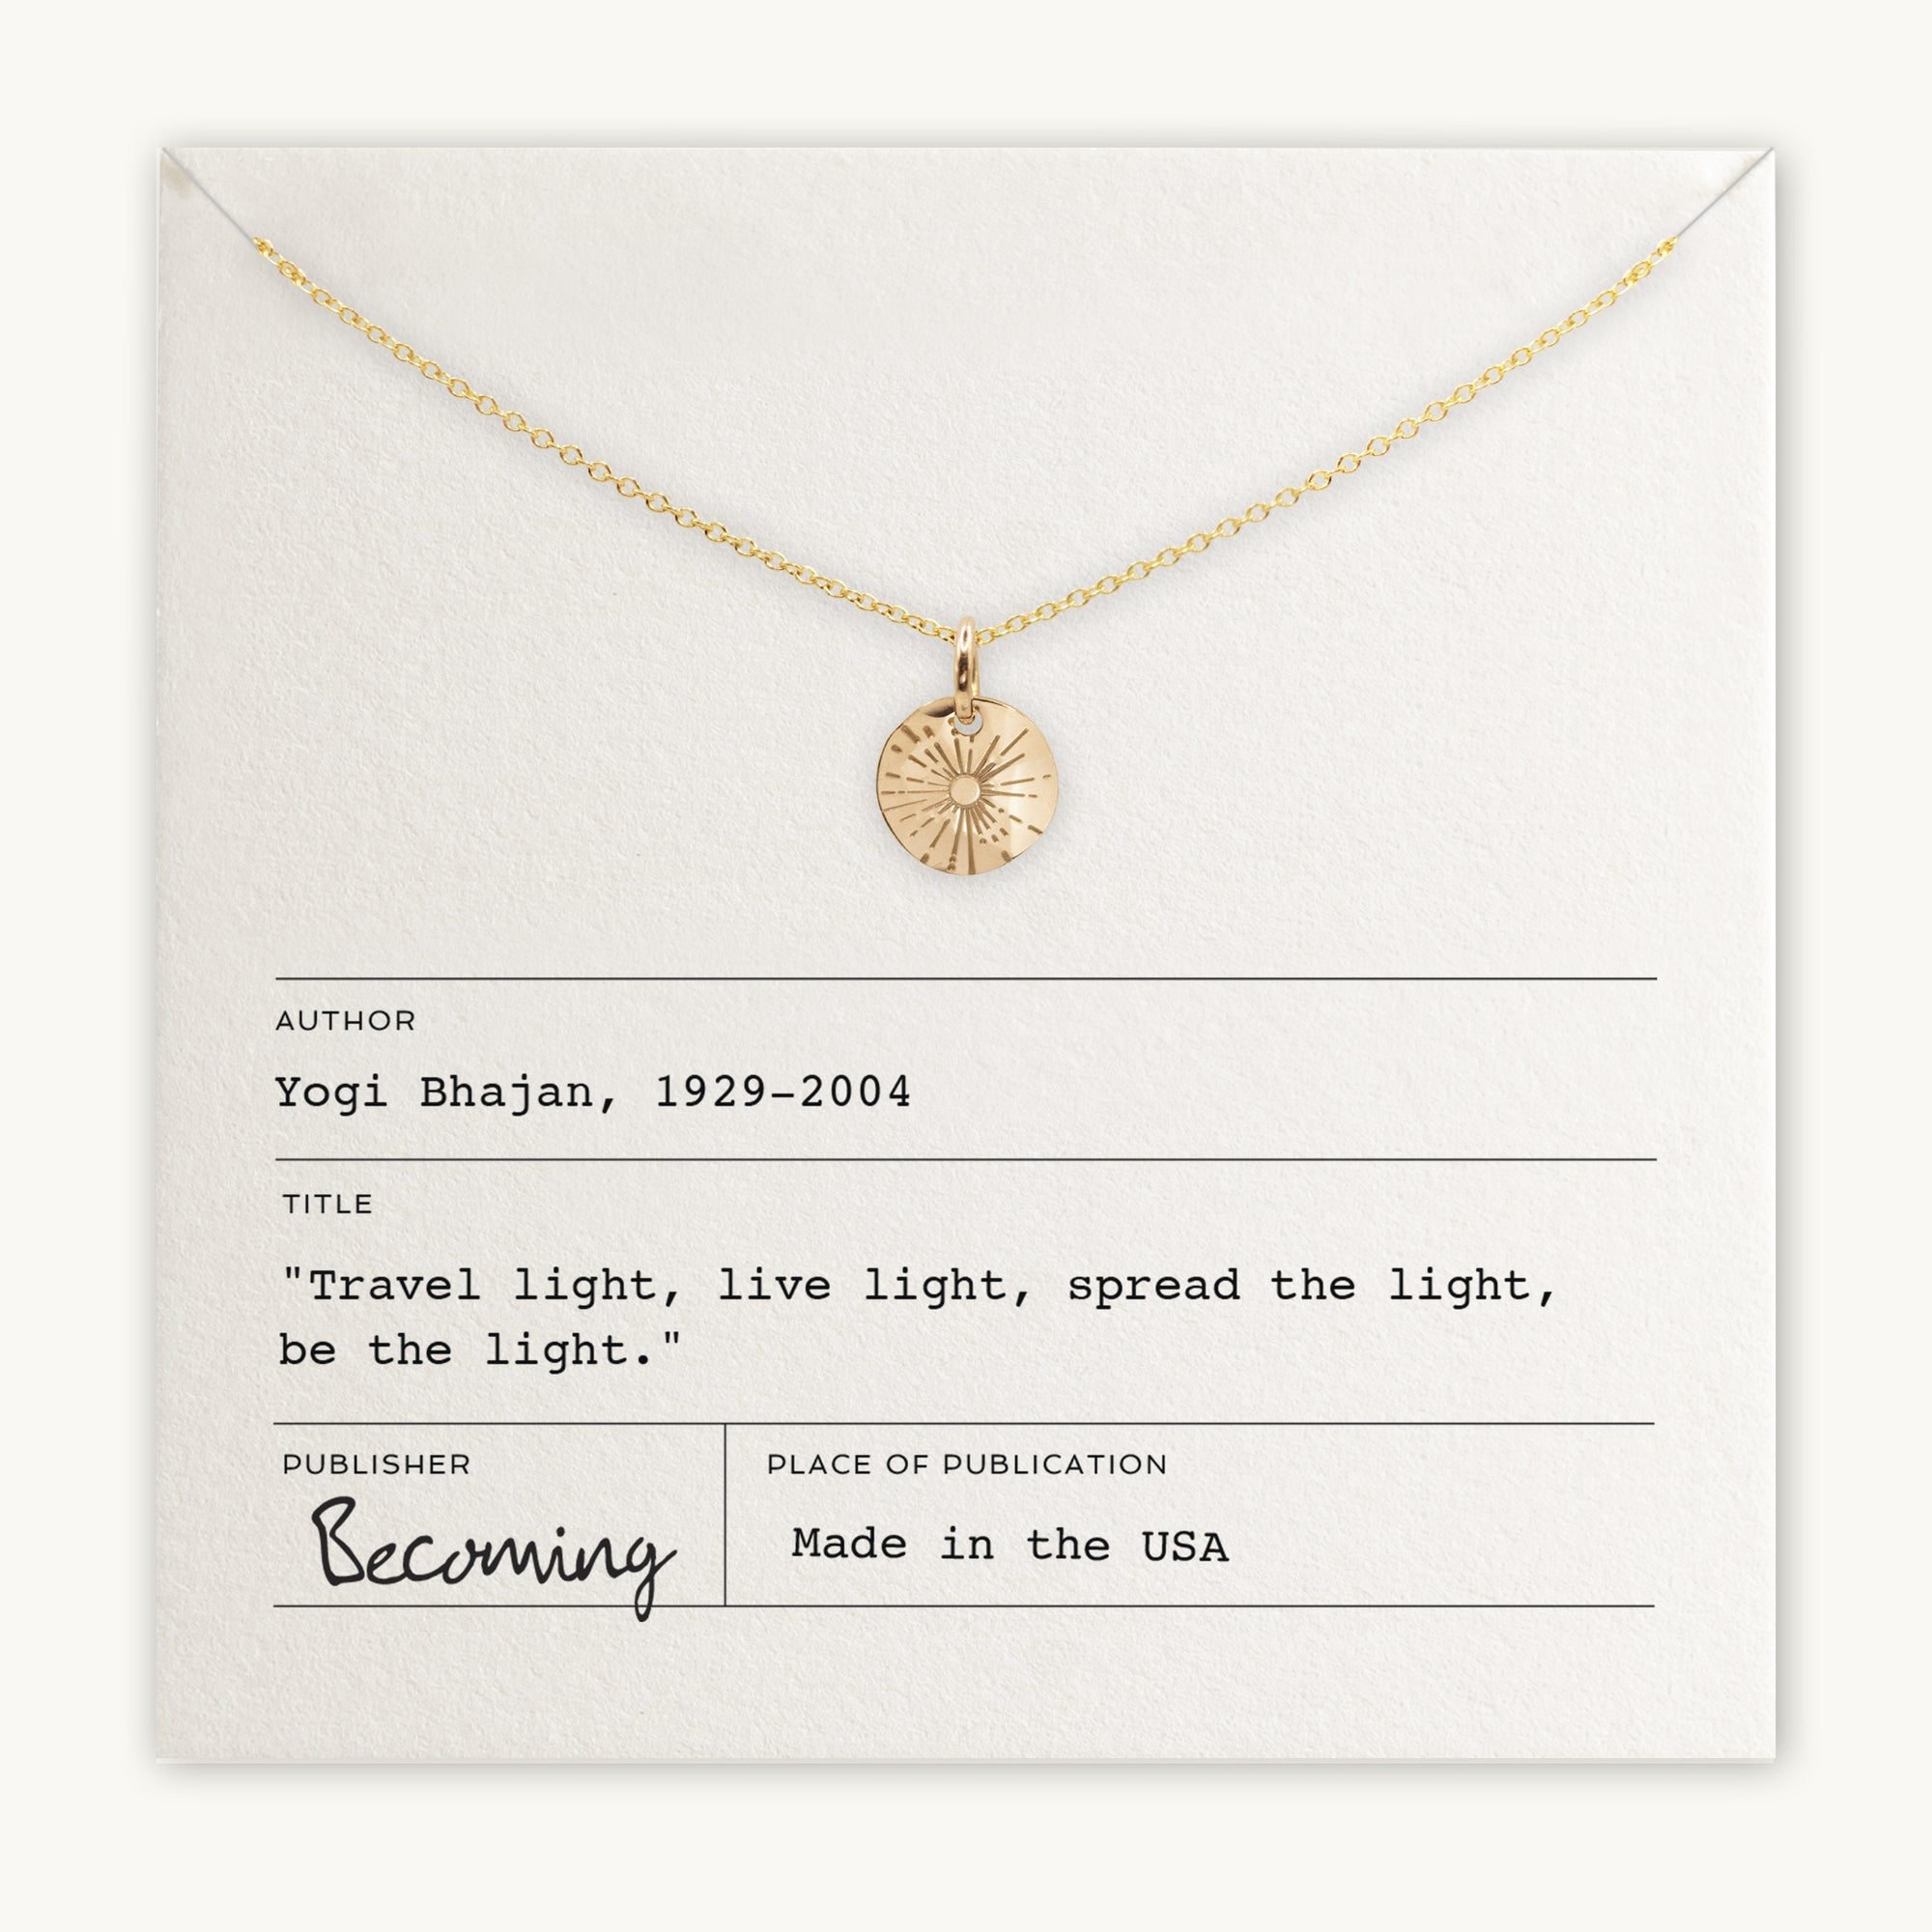 Becoming Jewelry&#39;s Be The Light Necklace, a sterling silver necklace with sunshine charm pendant, displayed on a card with an inspirational quote by Yogi Bhajan.